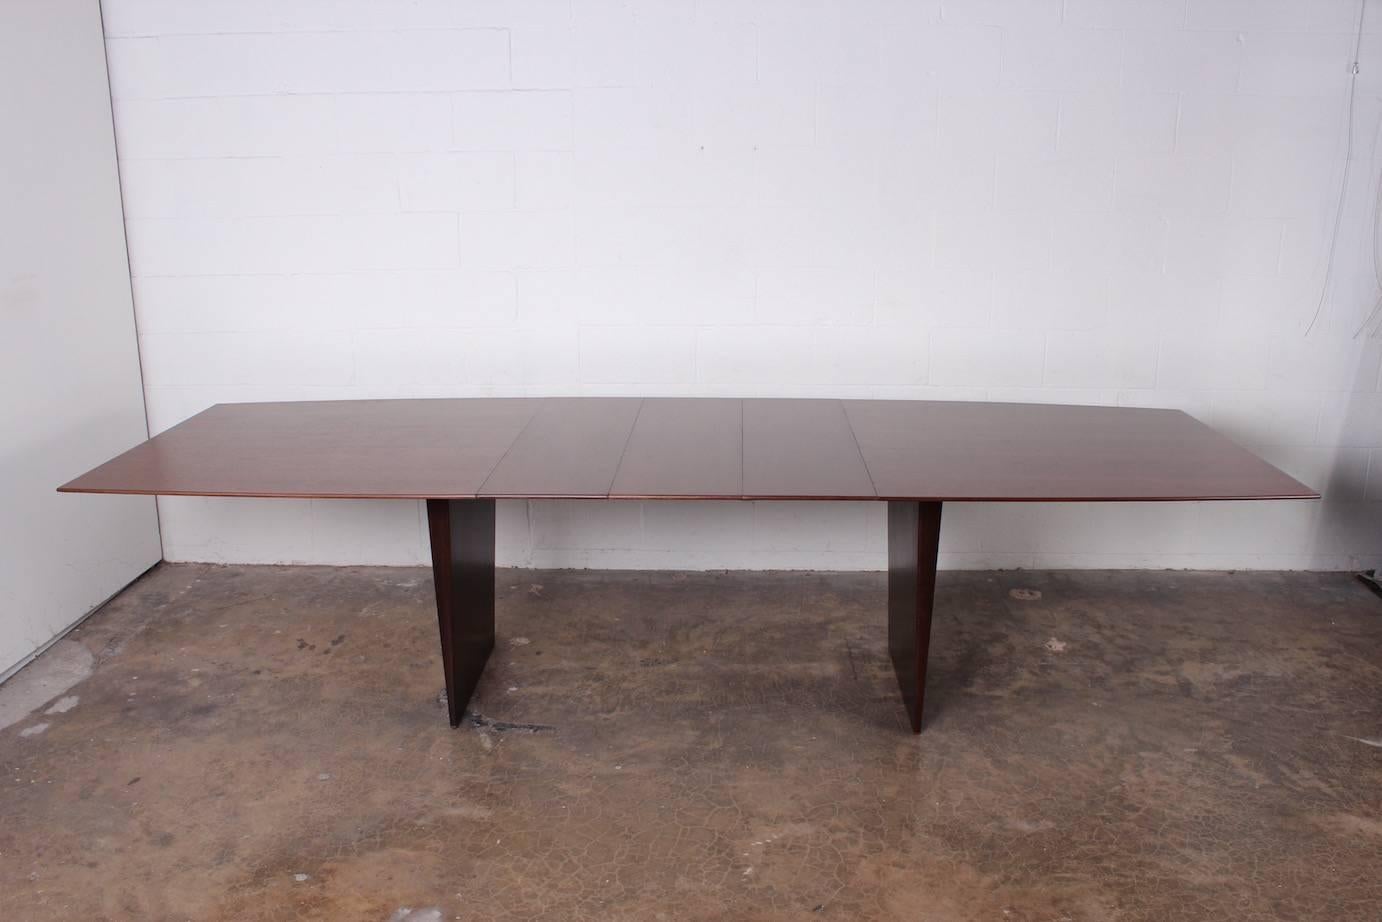 A large two-toned walnut dining table designed by Edward Wormley for Dunbar. This is the larger version of this table which has three 12